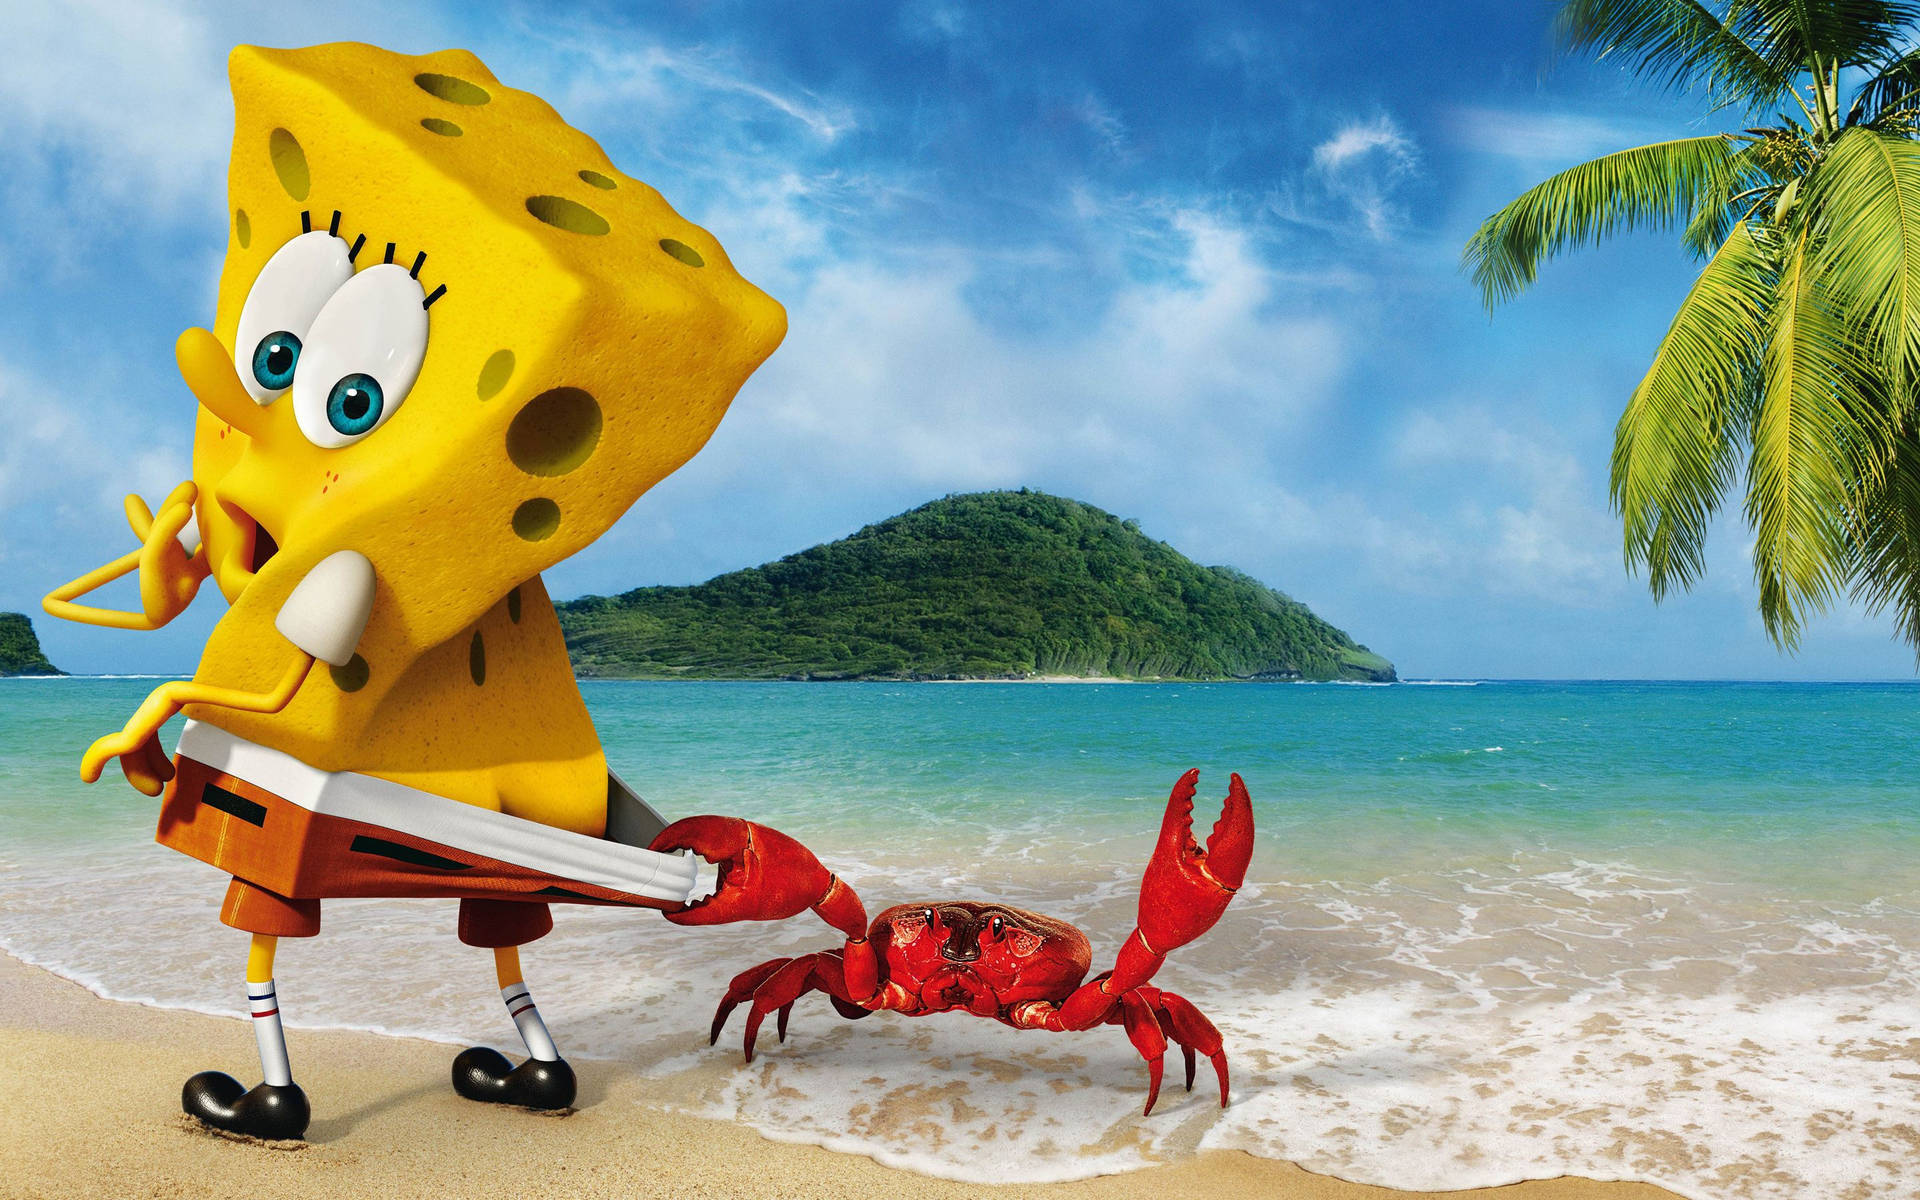 Cute Spongebob Square Pants Pinched By Crab